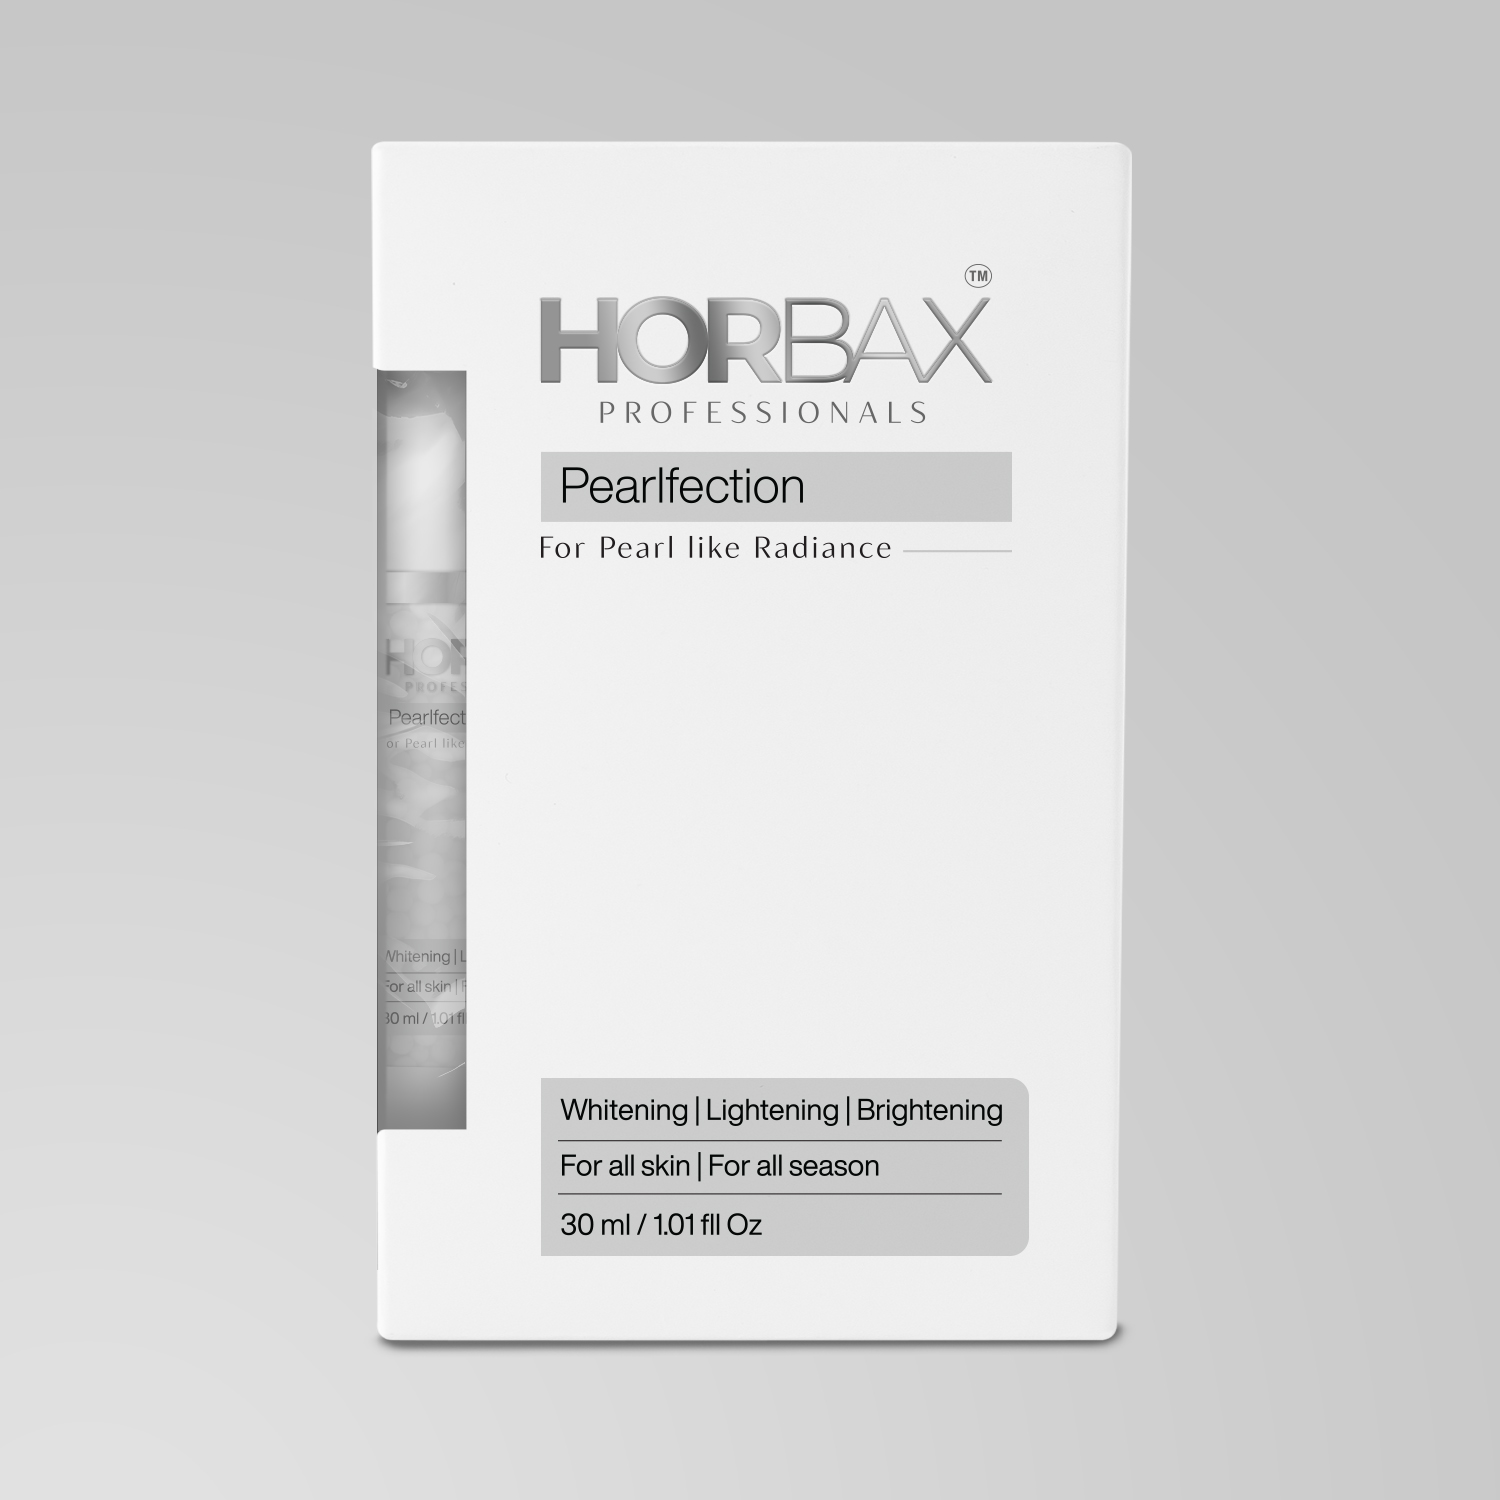 Pearlfection by horbax india